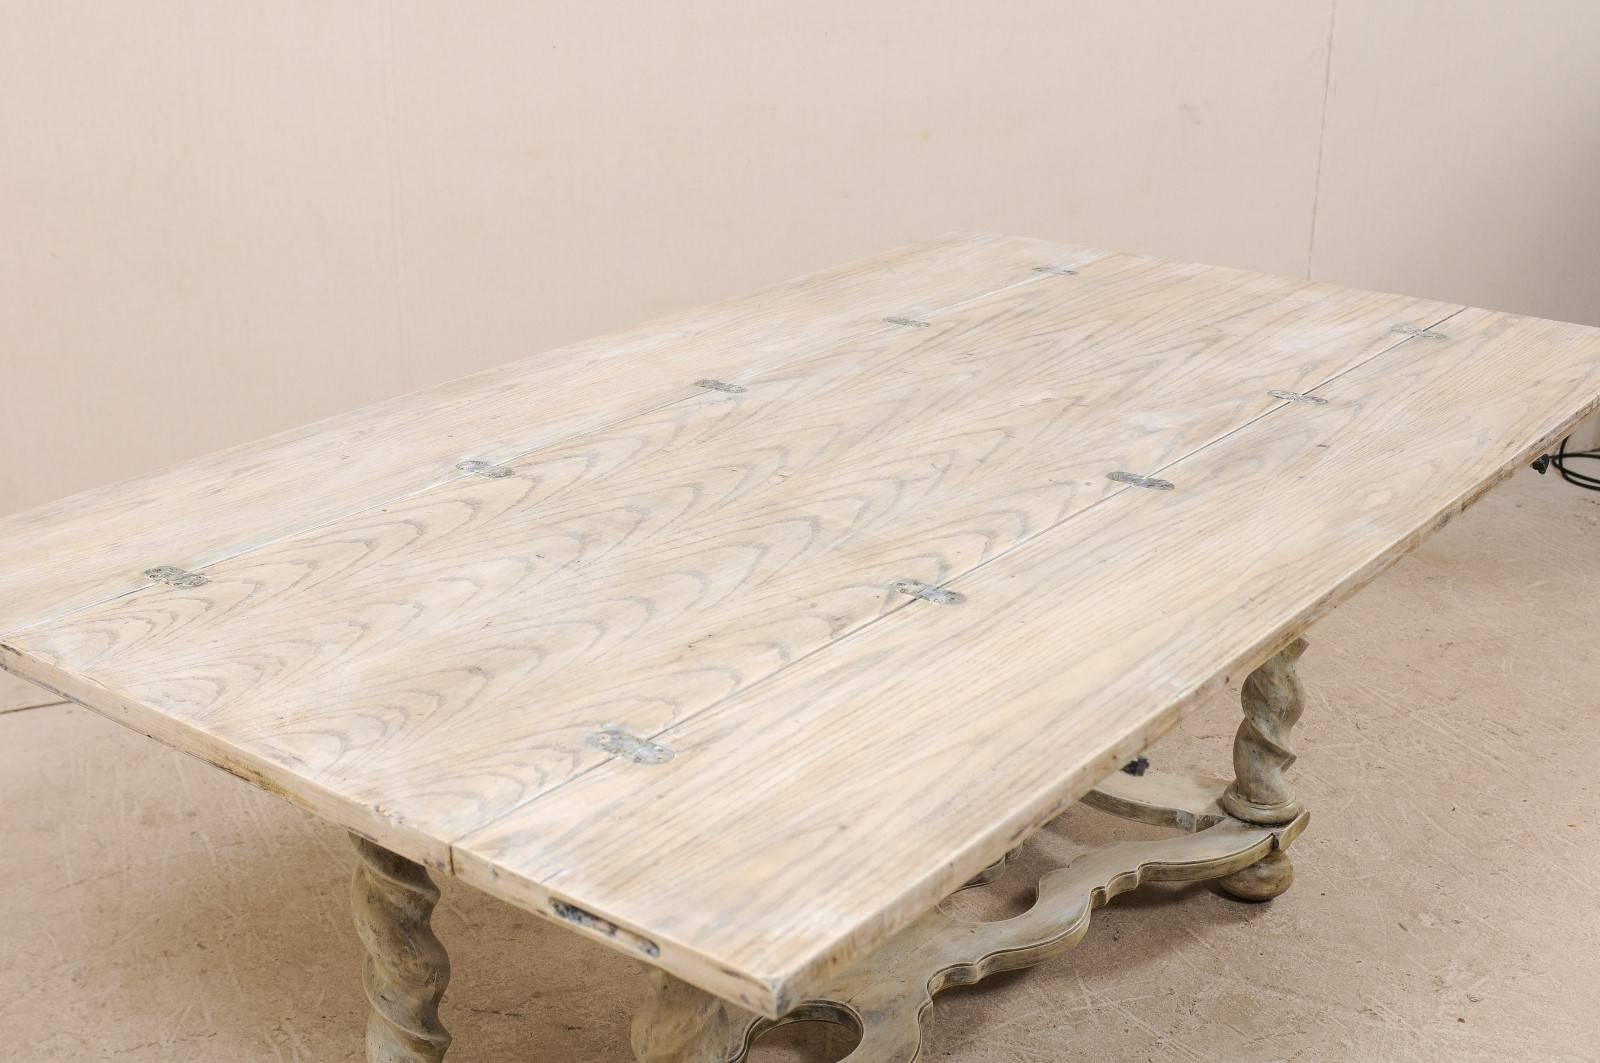 20th Century Vintage Convertible Painted Wood Console Table in Light Wash with Twist Legs